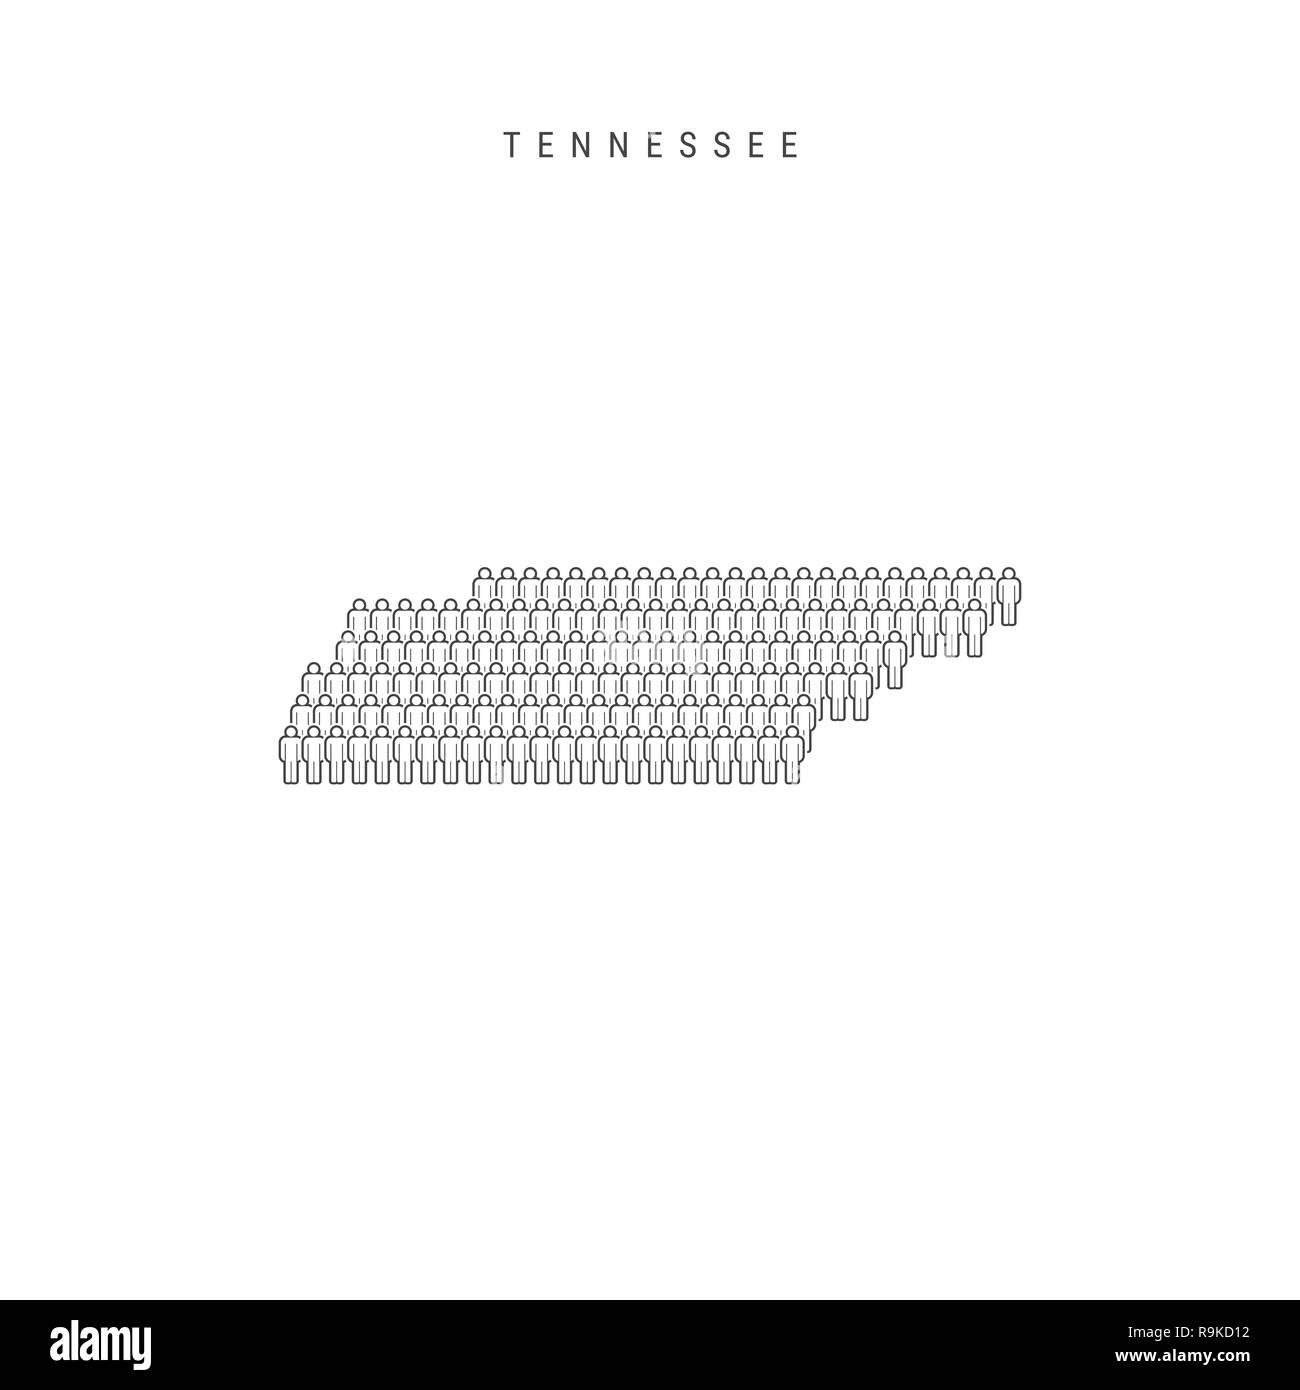 People Map of Tennessee, US State. Stylized Silhouette, People Crowd in the Shape of a Map of Tennessee. Tennessee Population. Illustration Isolated o Stock Photo